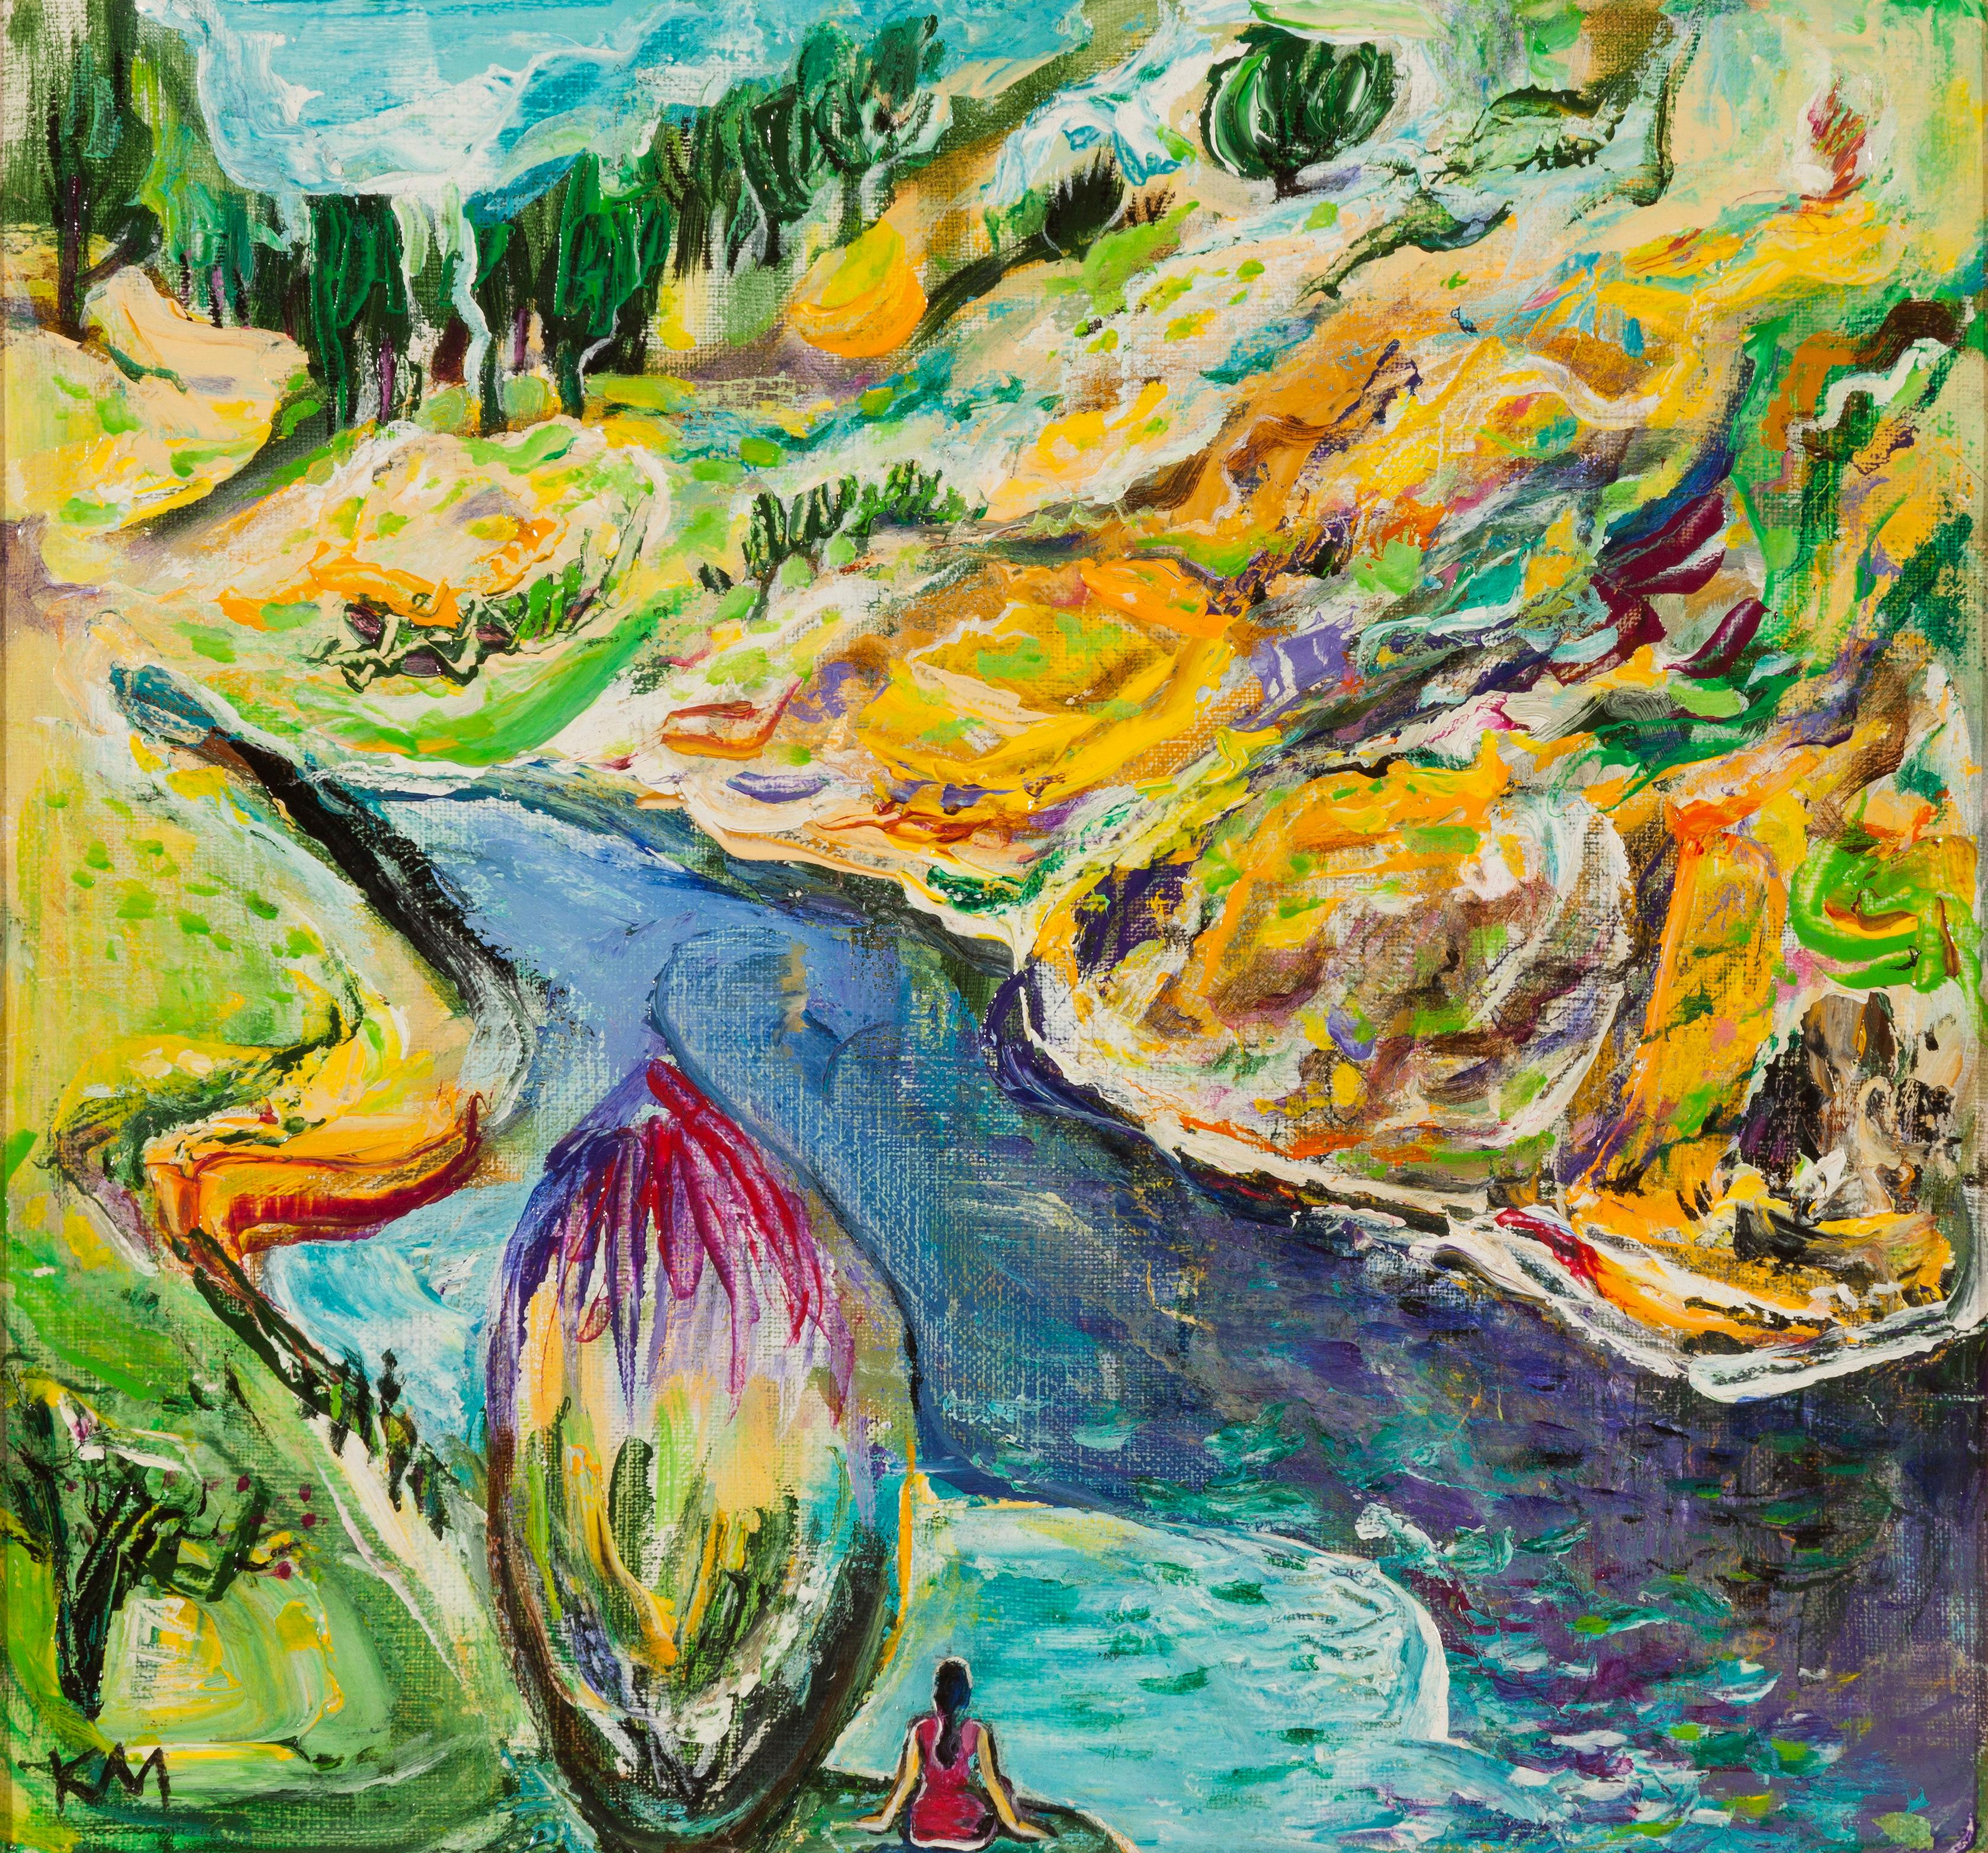 "Scenic Slopes At The Lake" is an impressionist painting by Maestro Krassimira Mihaylova.

About the artwork:

TECHNIQUE:  oil painting
STYLE: Impressionist, Contemporary
Edition: Unique, signed
Weight: Approximately 2 kg.

The painting is